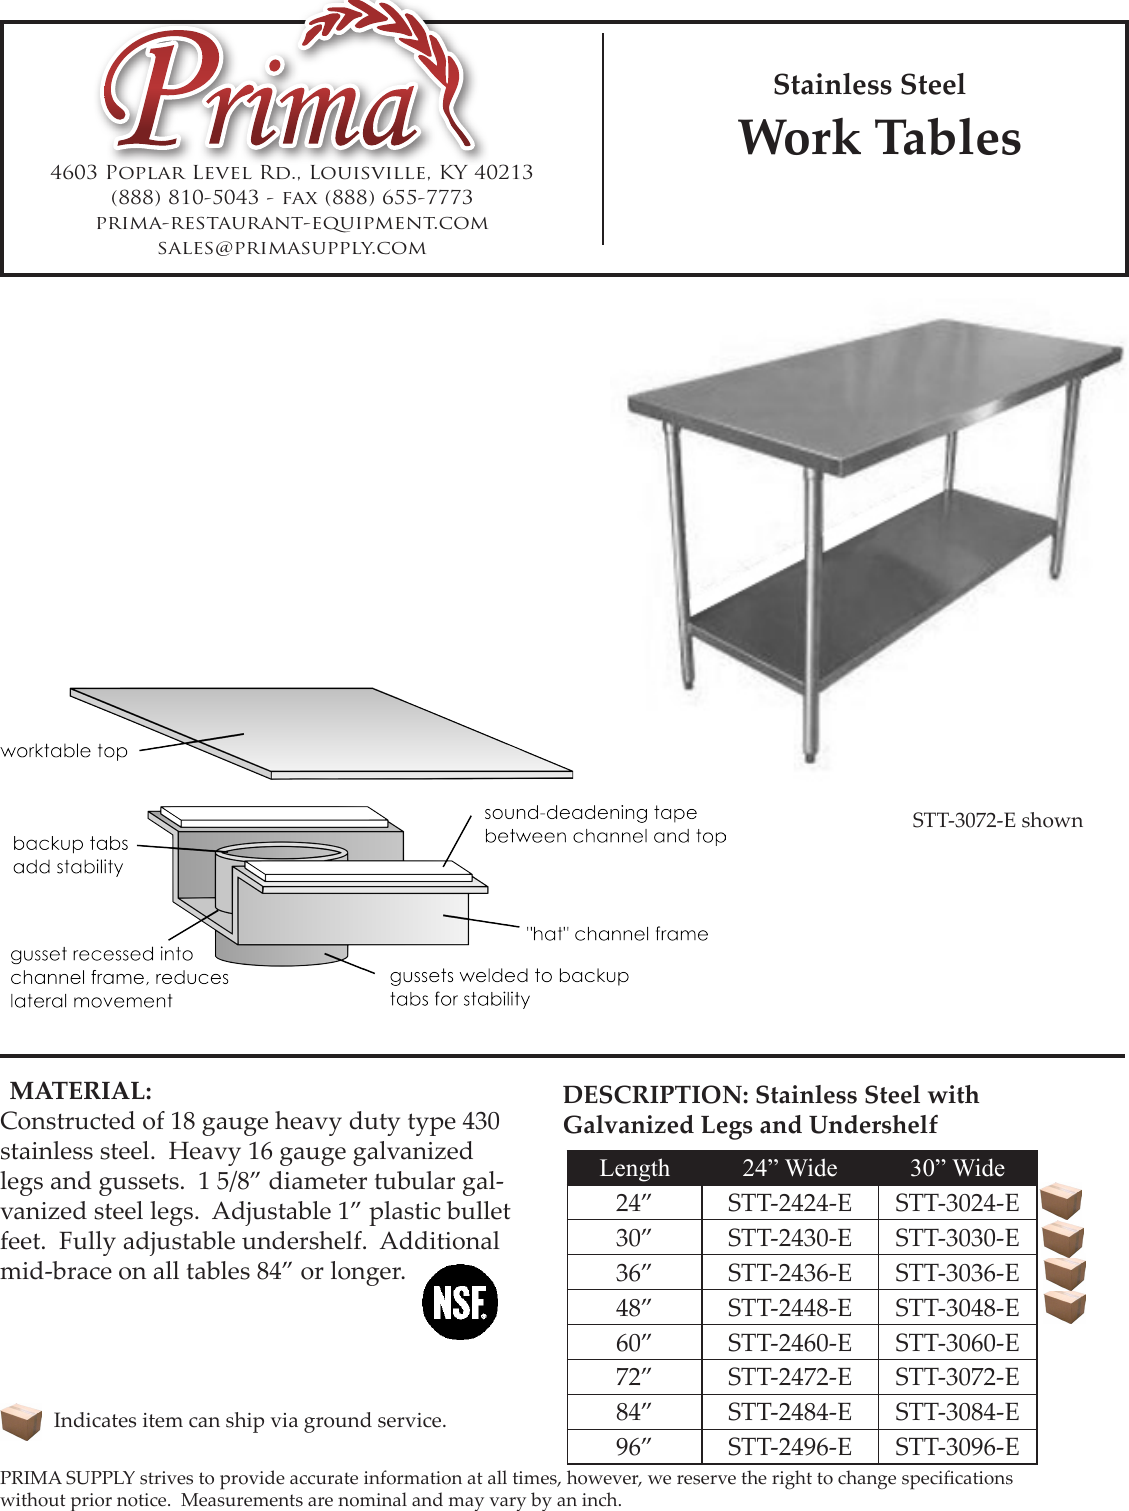 Page 1 of 2 - Work Tables